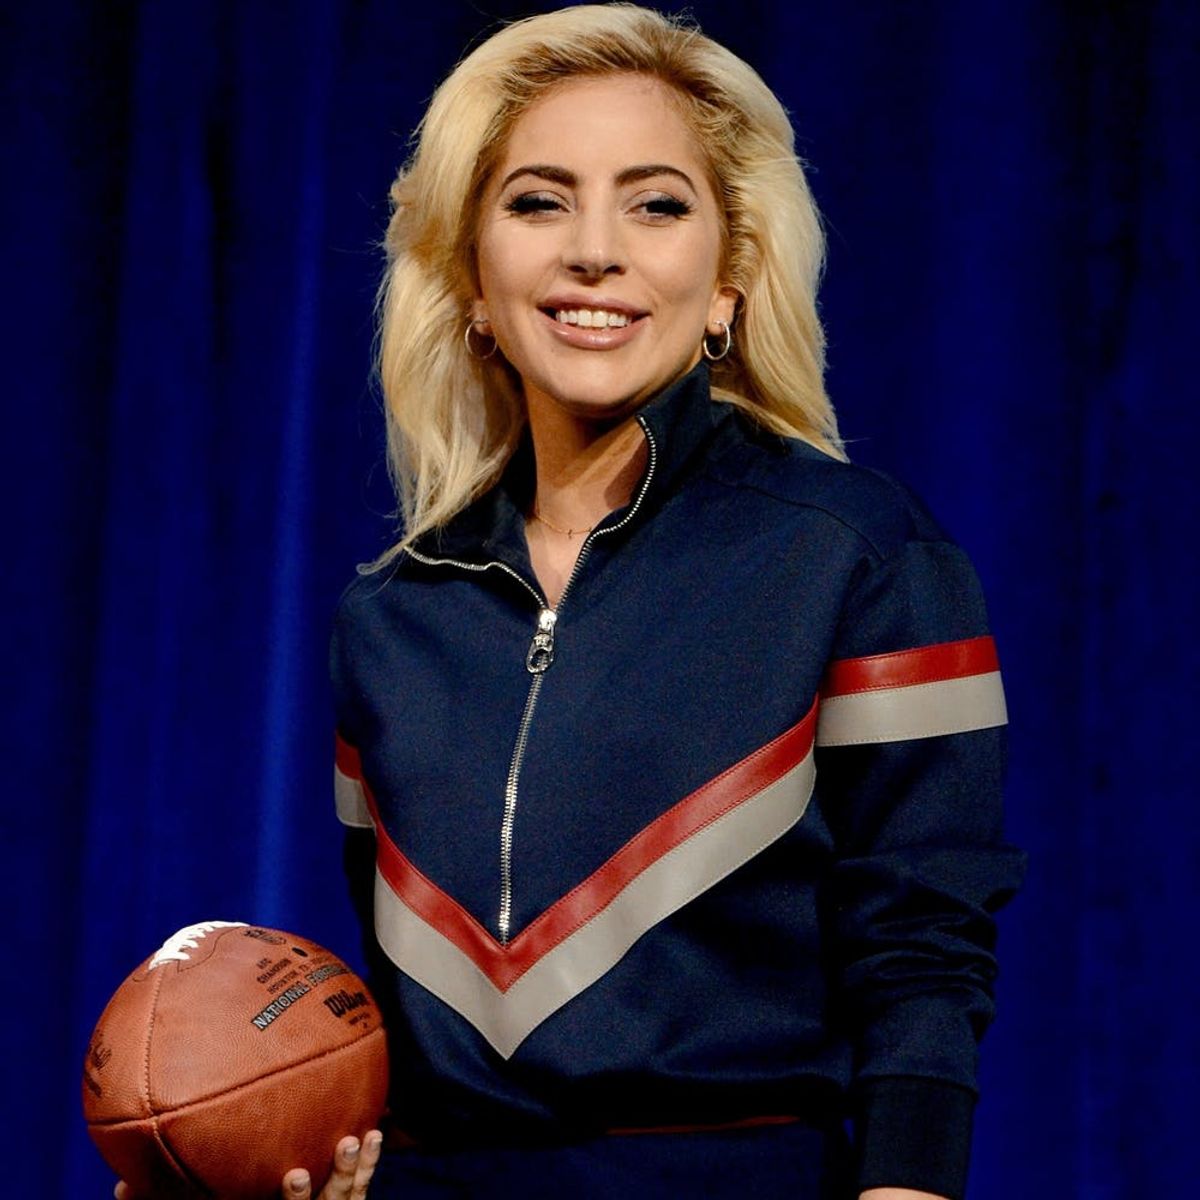 Twitter Is Lighting Up the New England Patriots After Lady Gaga Caught the Football Like a Champ